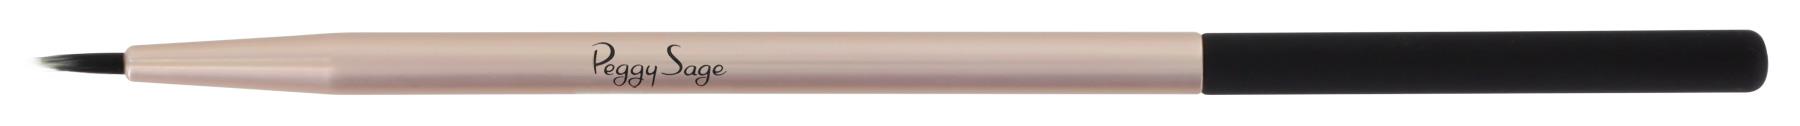 PEGGY SAGE ACC.TRUCCO 135223 PENNELLO EYELINER